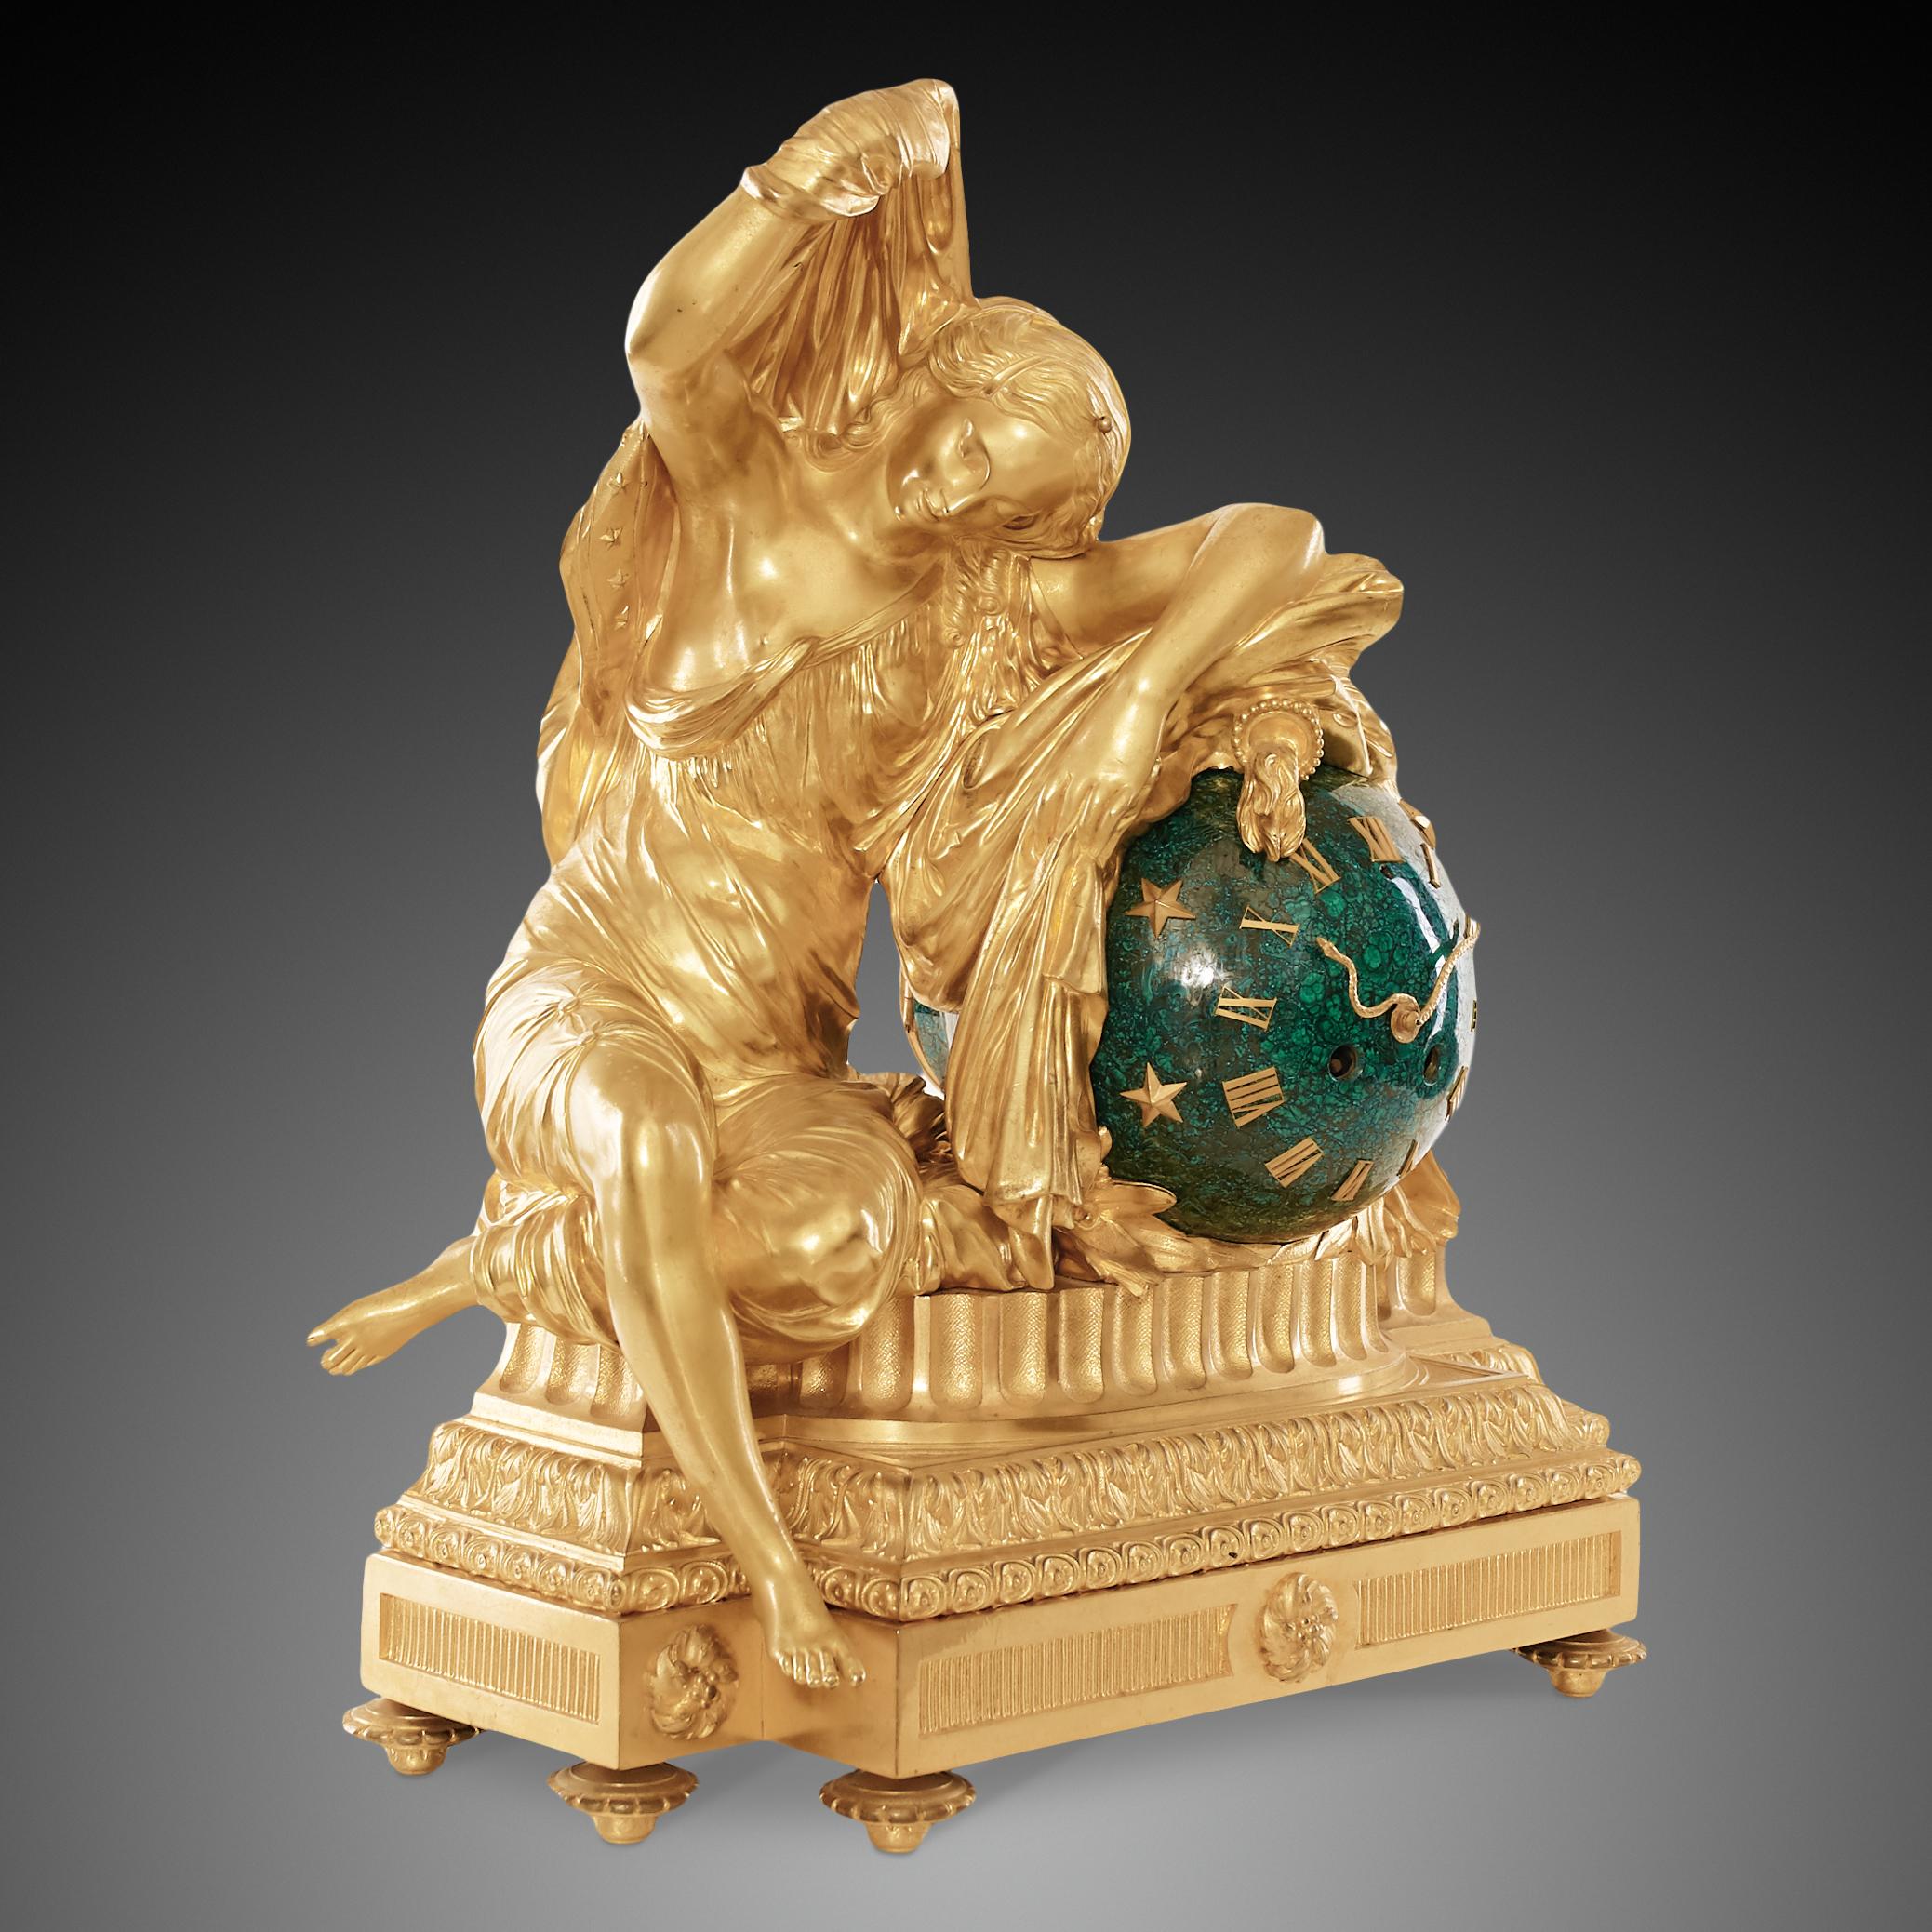 This superb malachite mantel clock dates from the period of Charles X. It is made with extreme precision with attention to the smallest details. The clock has a gold-colored base with delicate, elegant decorations which stands on four decorative